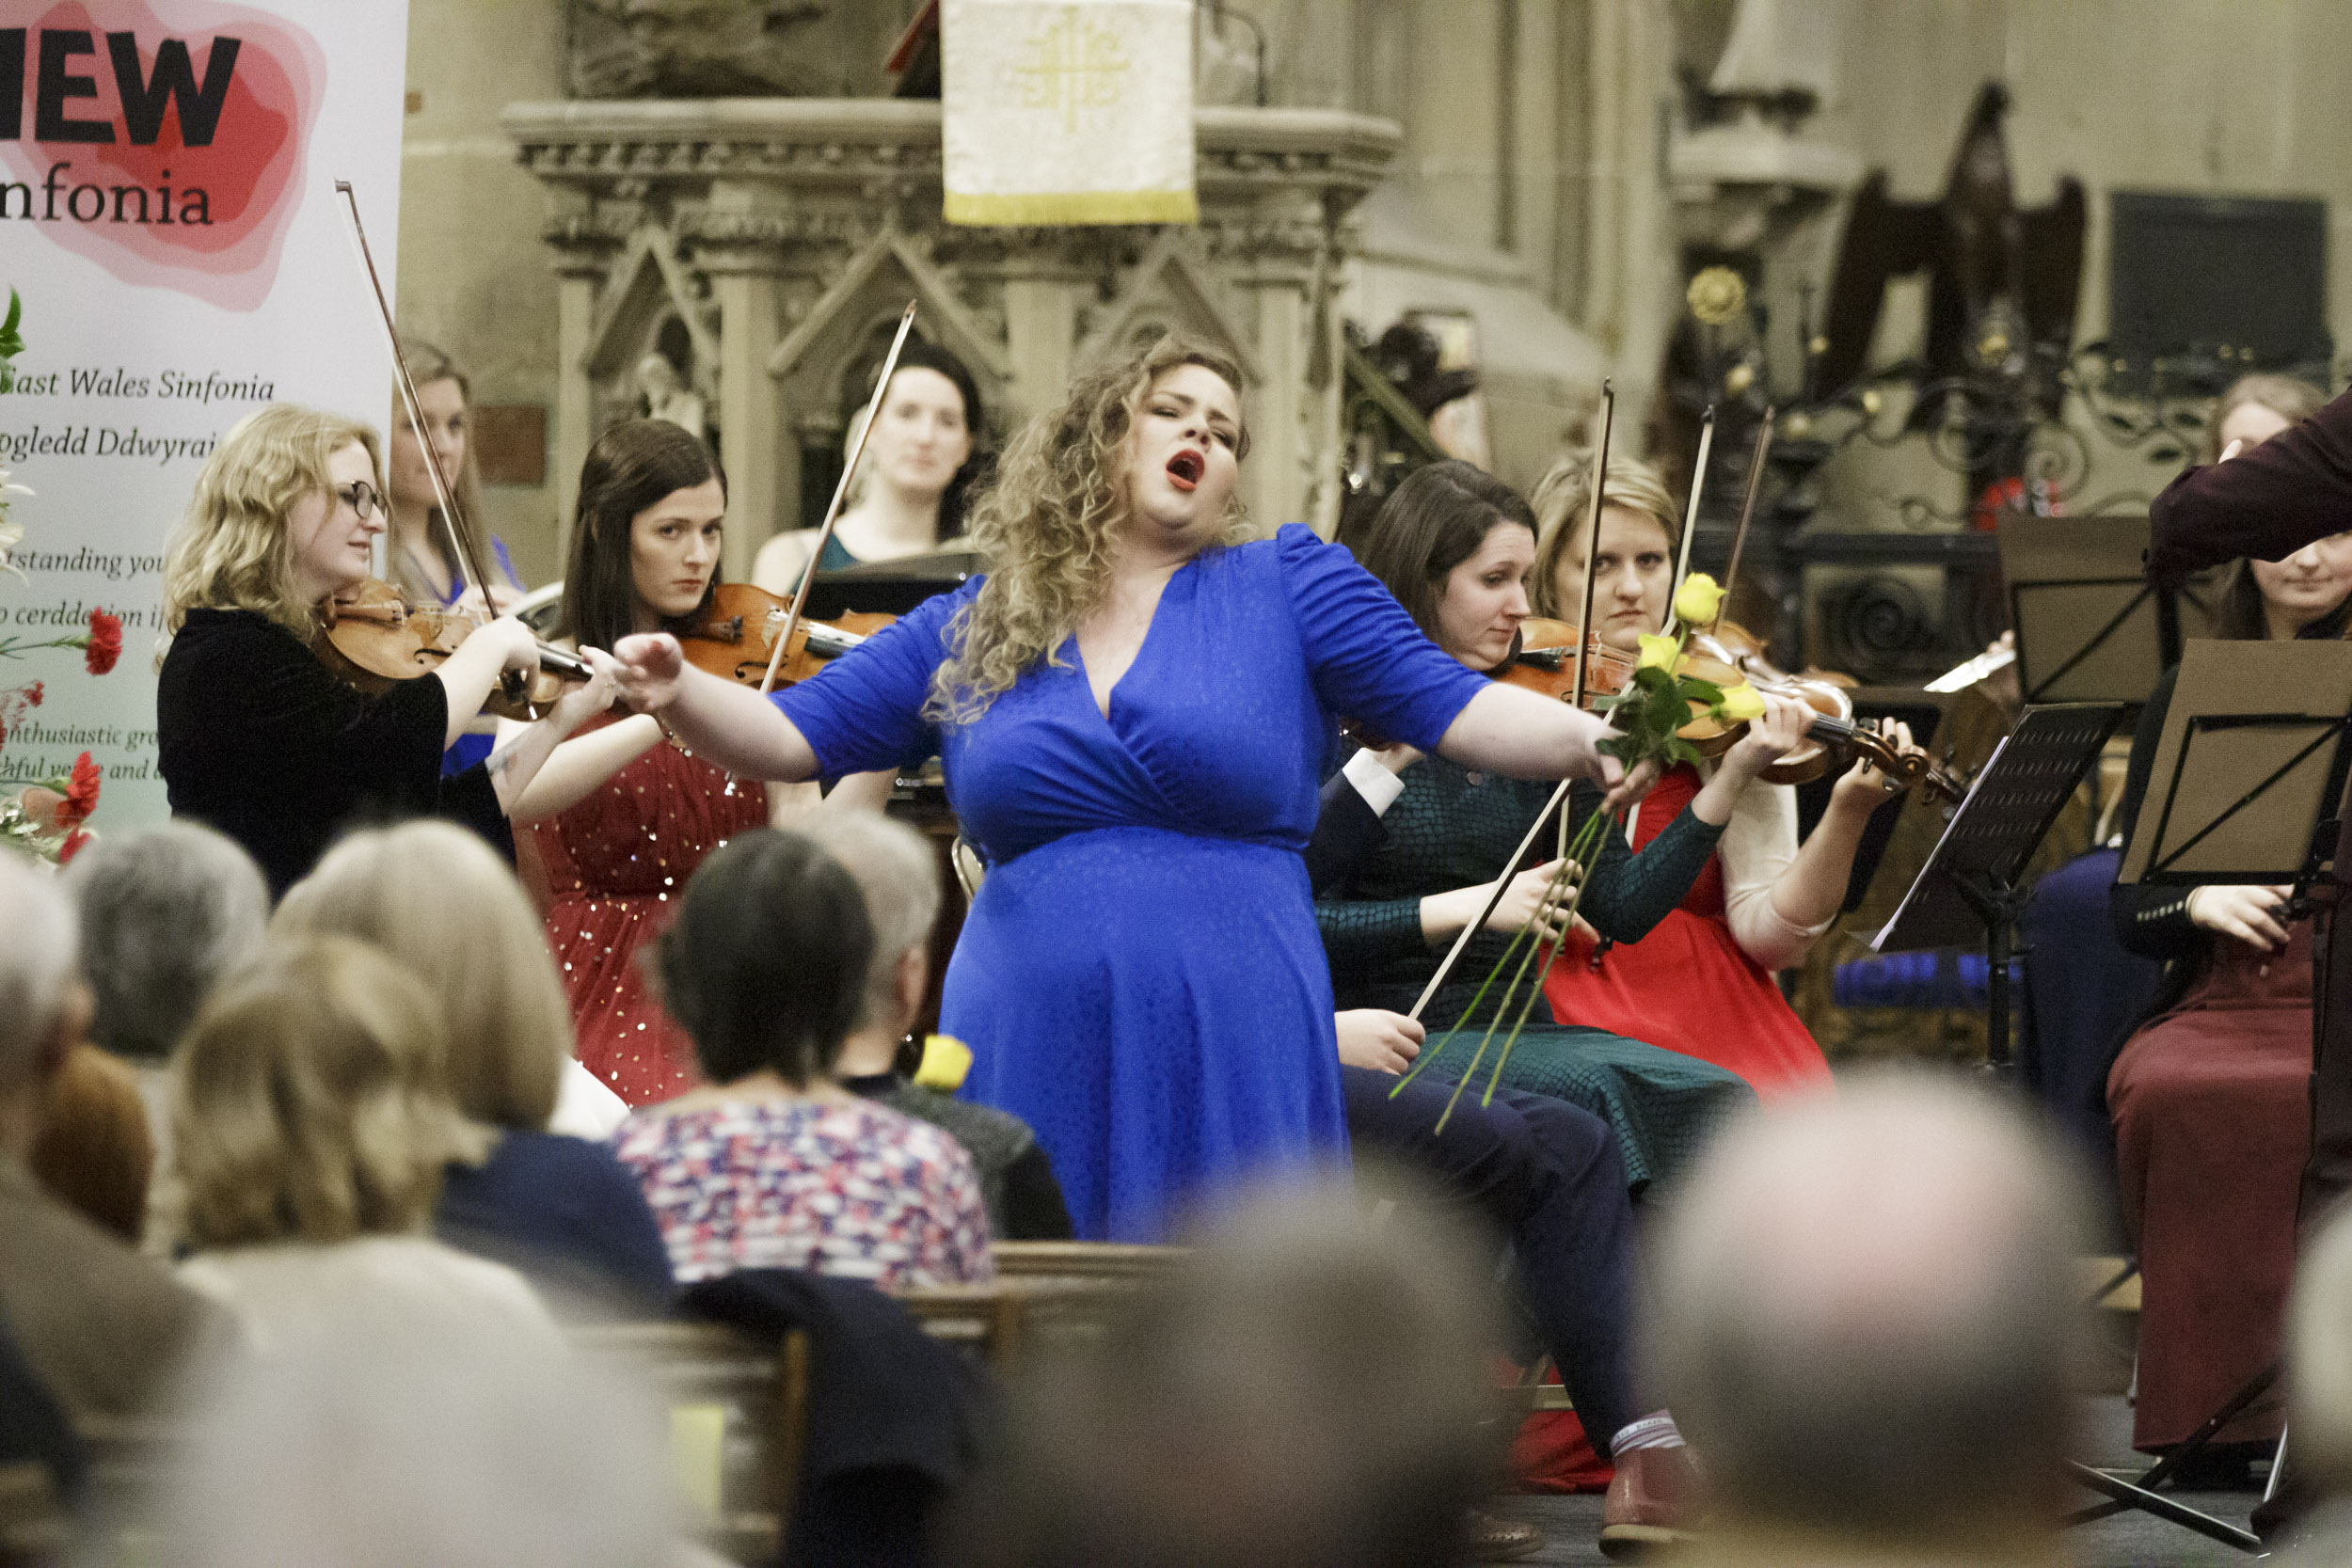 Top orchestra heralds New Year with musical magic in Wrexham